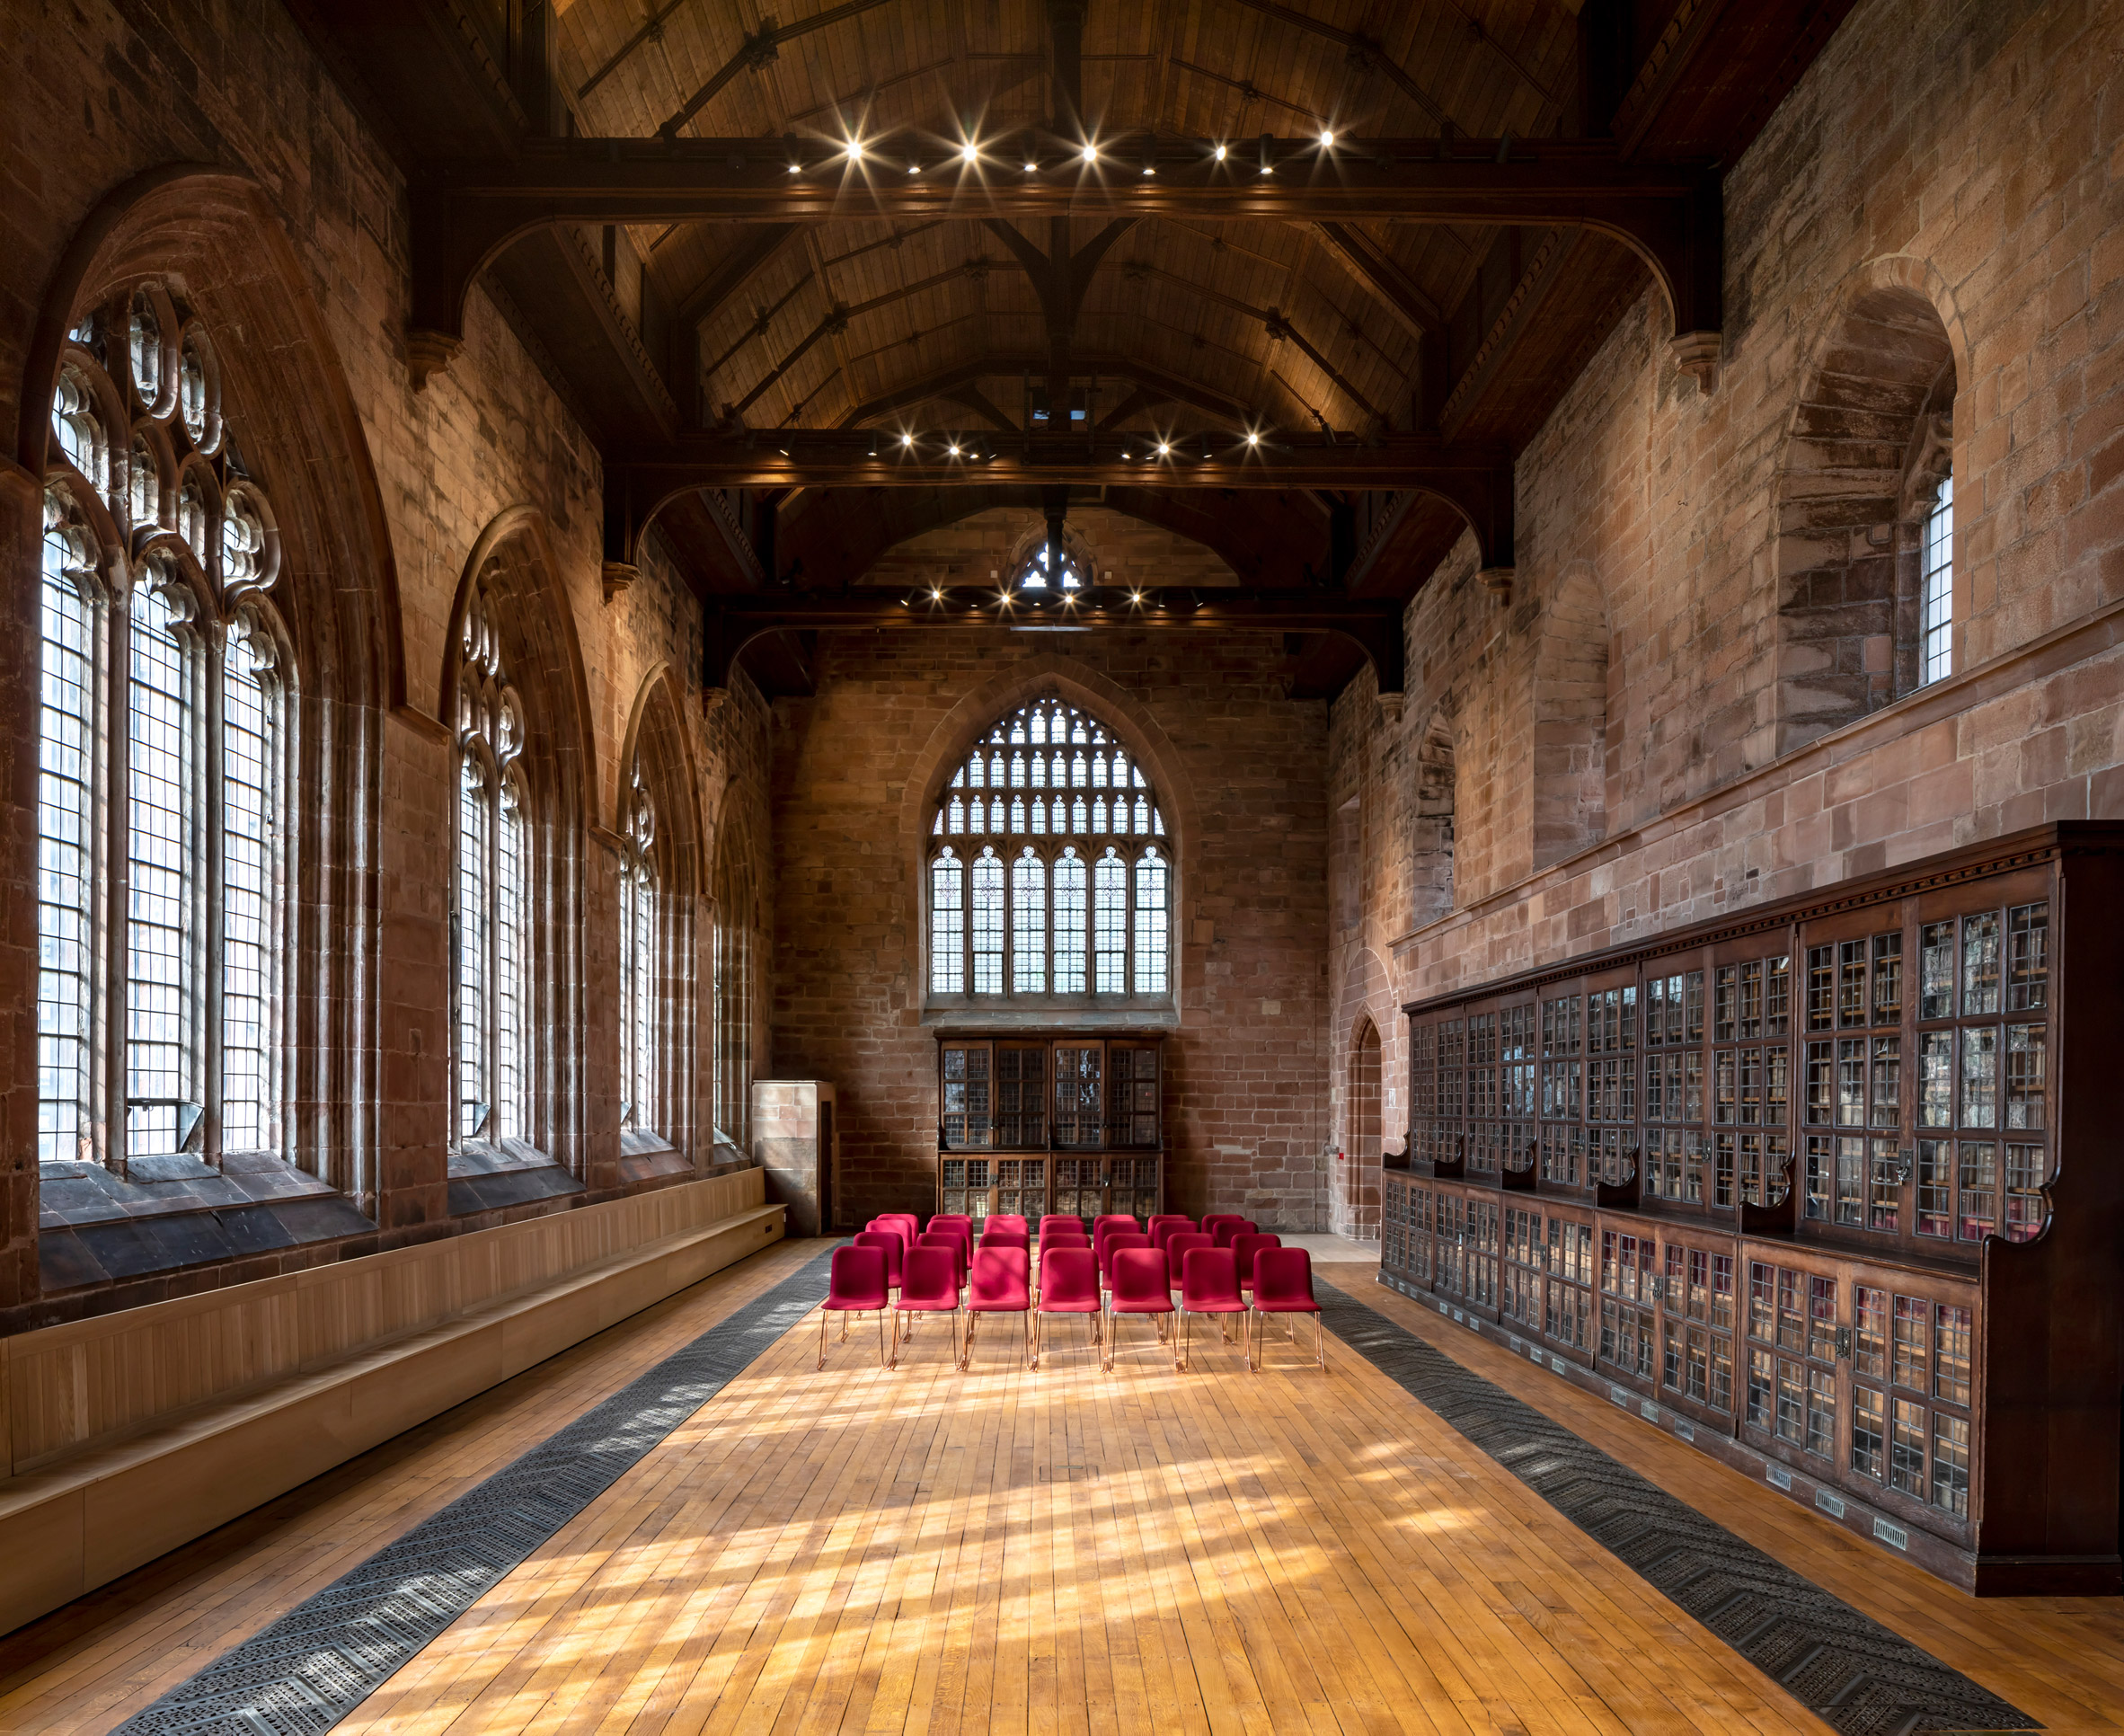 The events space in The Fratry at Carlisle Cathedral by Feilden Fowles